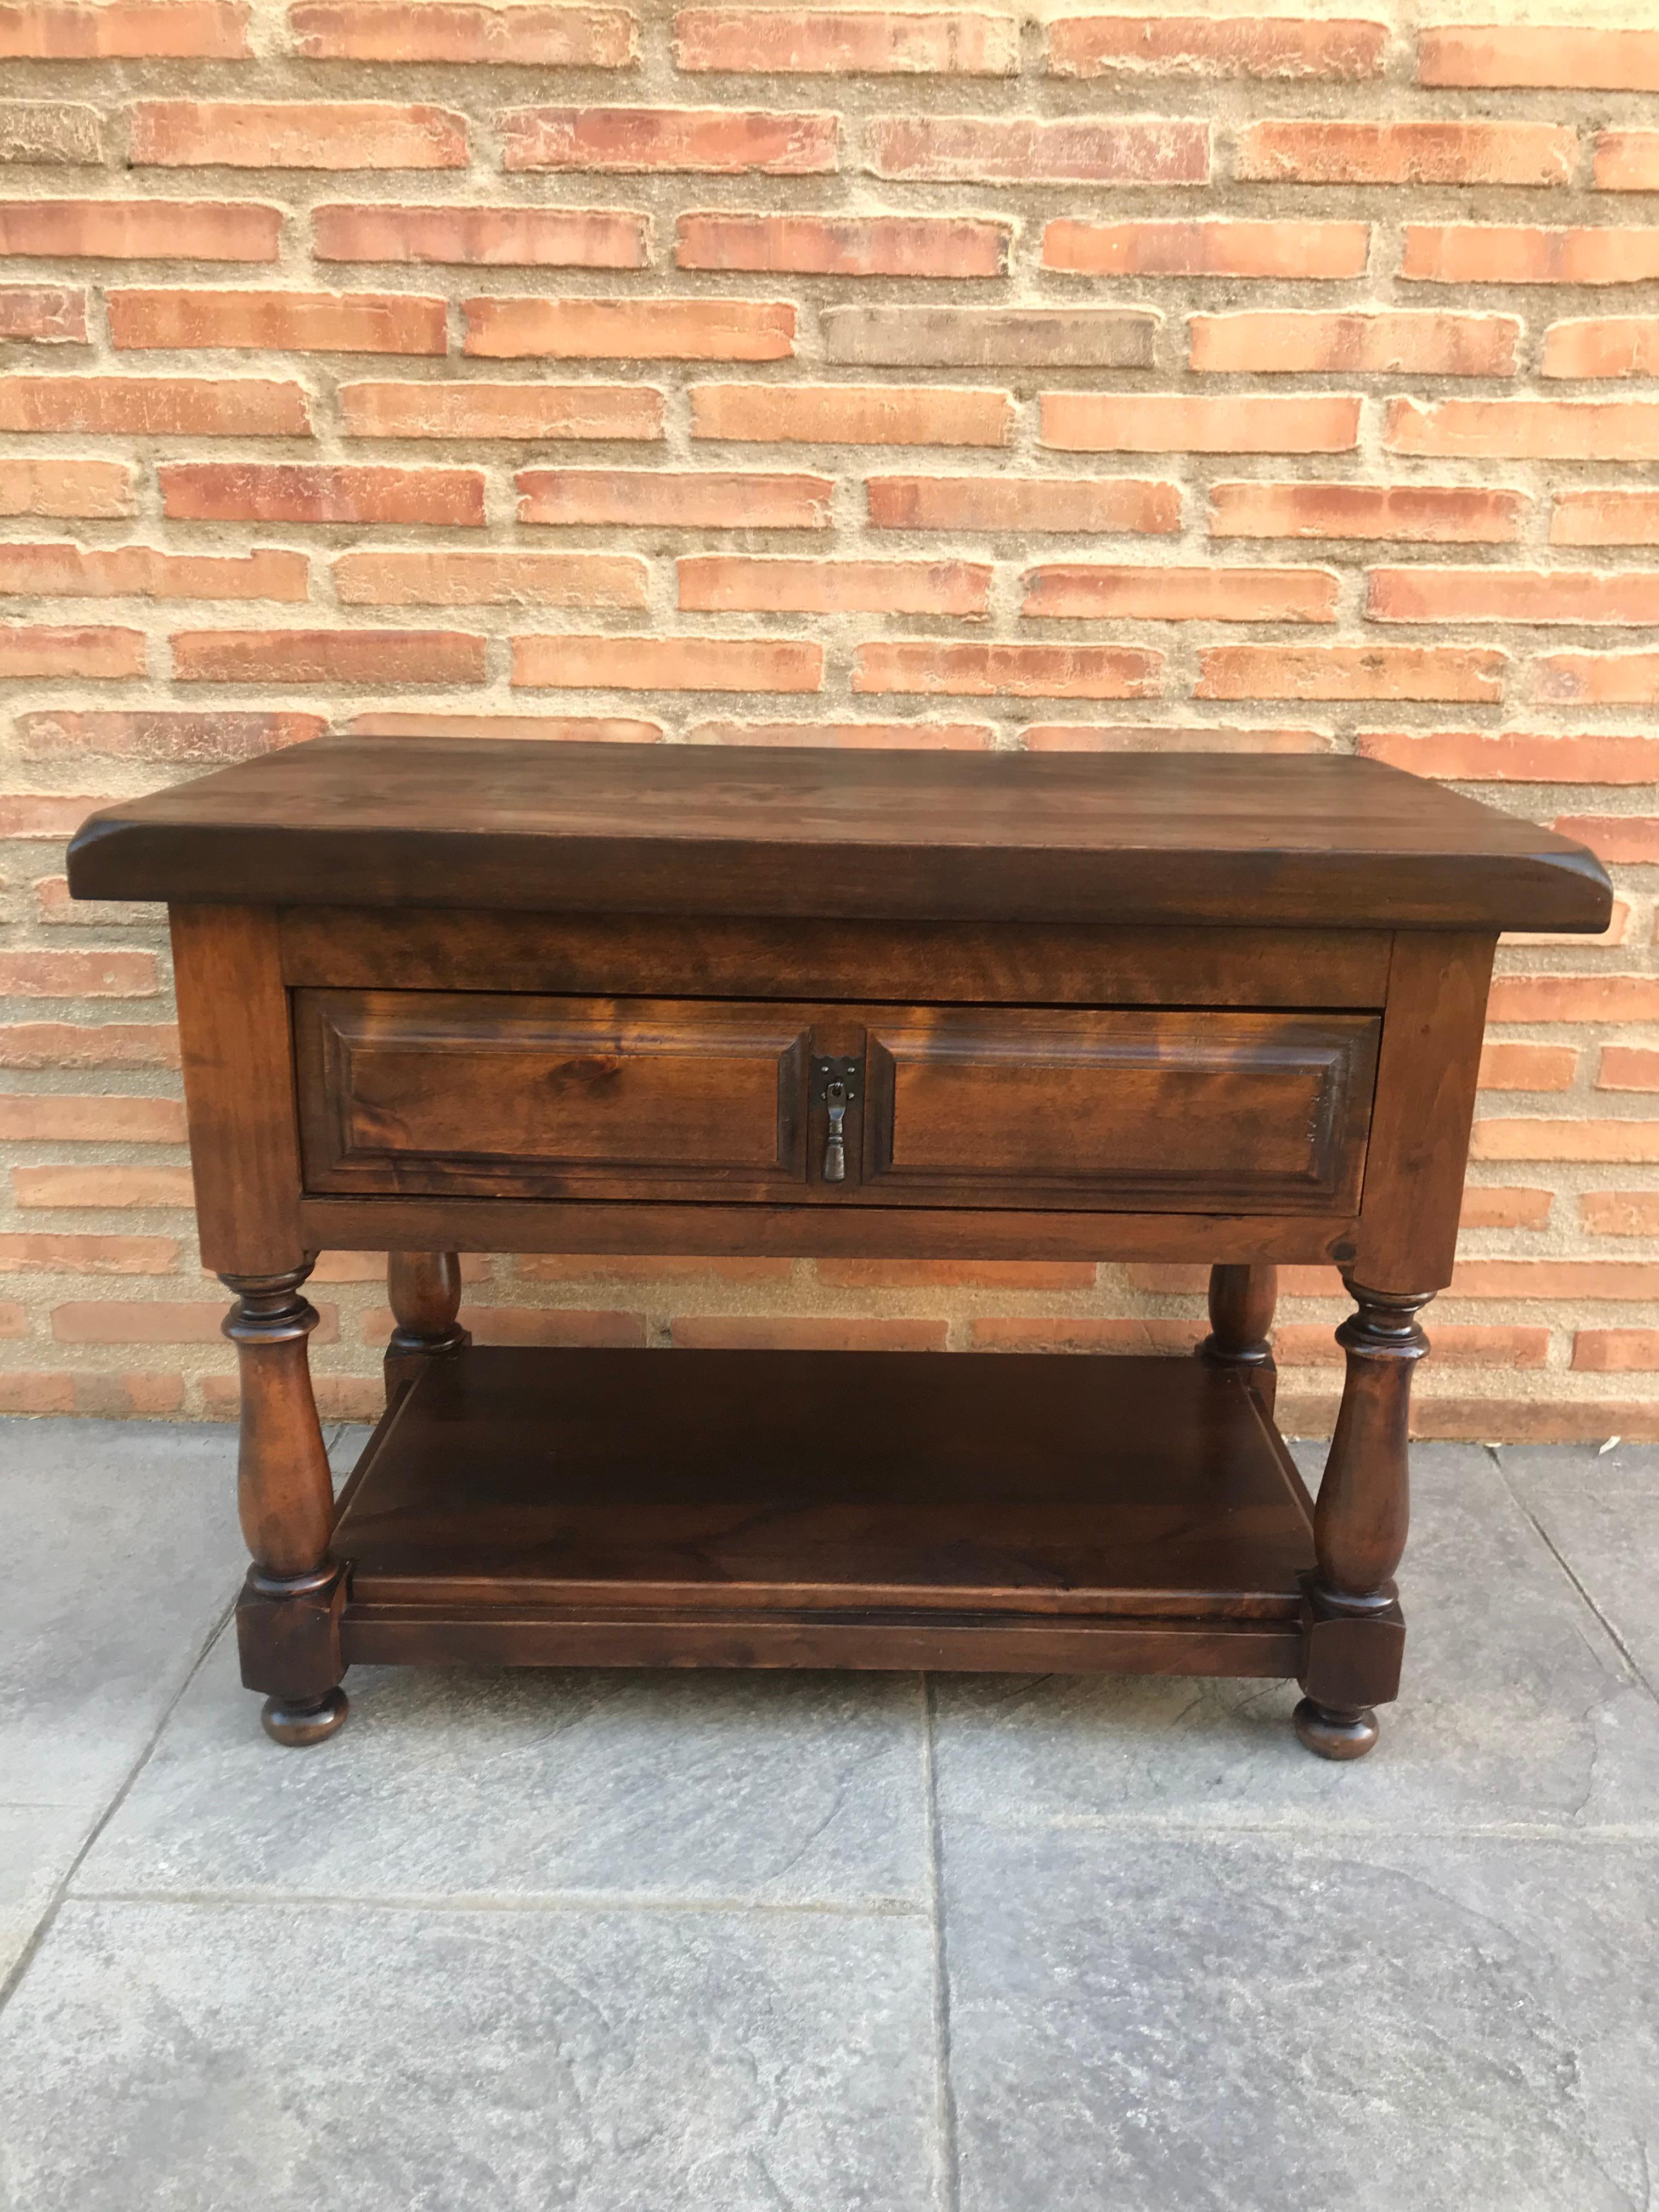 A Spanish walnut side table with single drawer.
This elegant Spanish table features a simple, rectangular top, sitting above a handcut dovetailed drawer.
With its patina, showing the age of the piece, and its elegant lines, this Spanish side